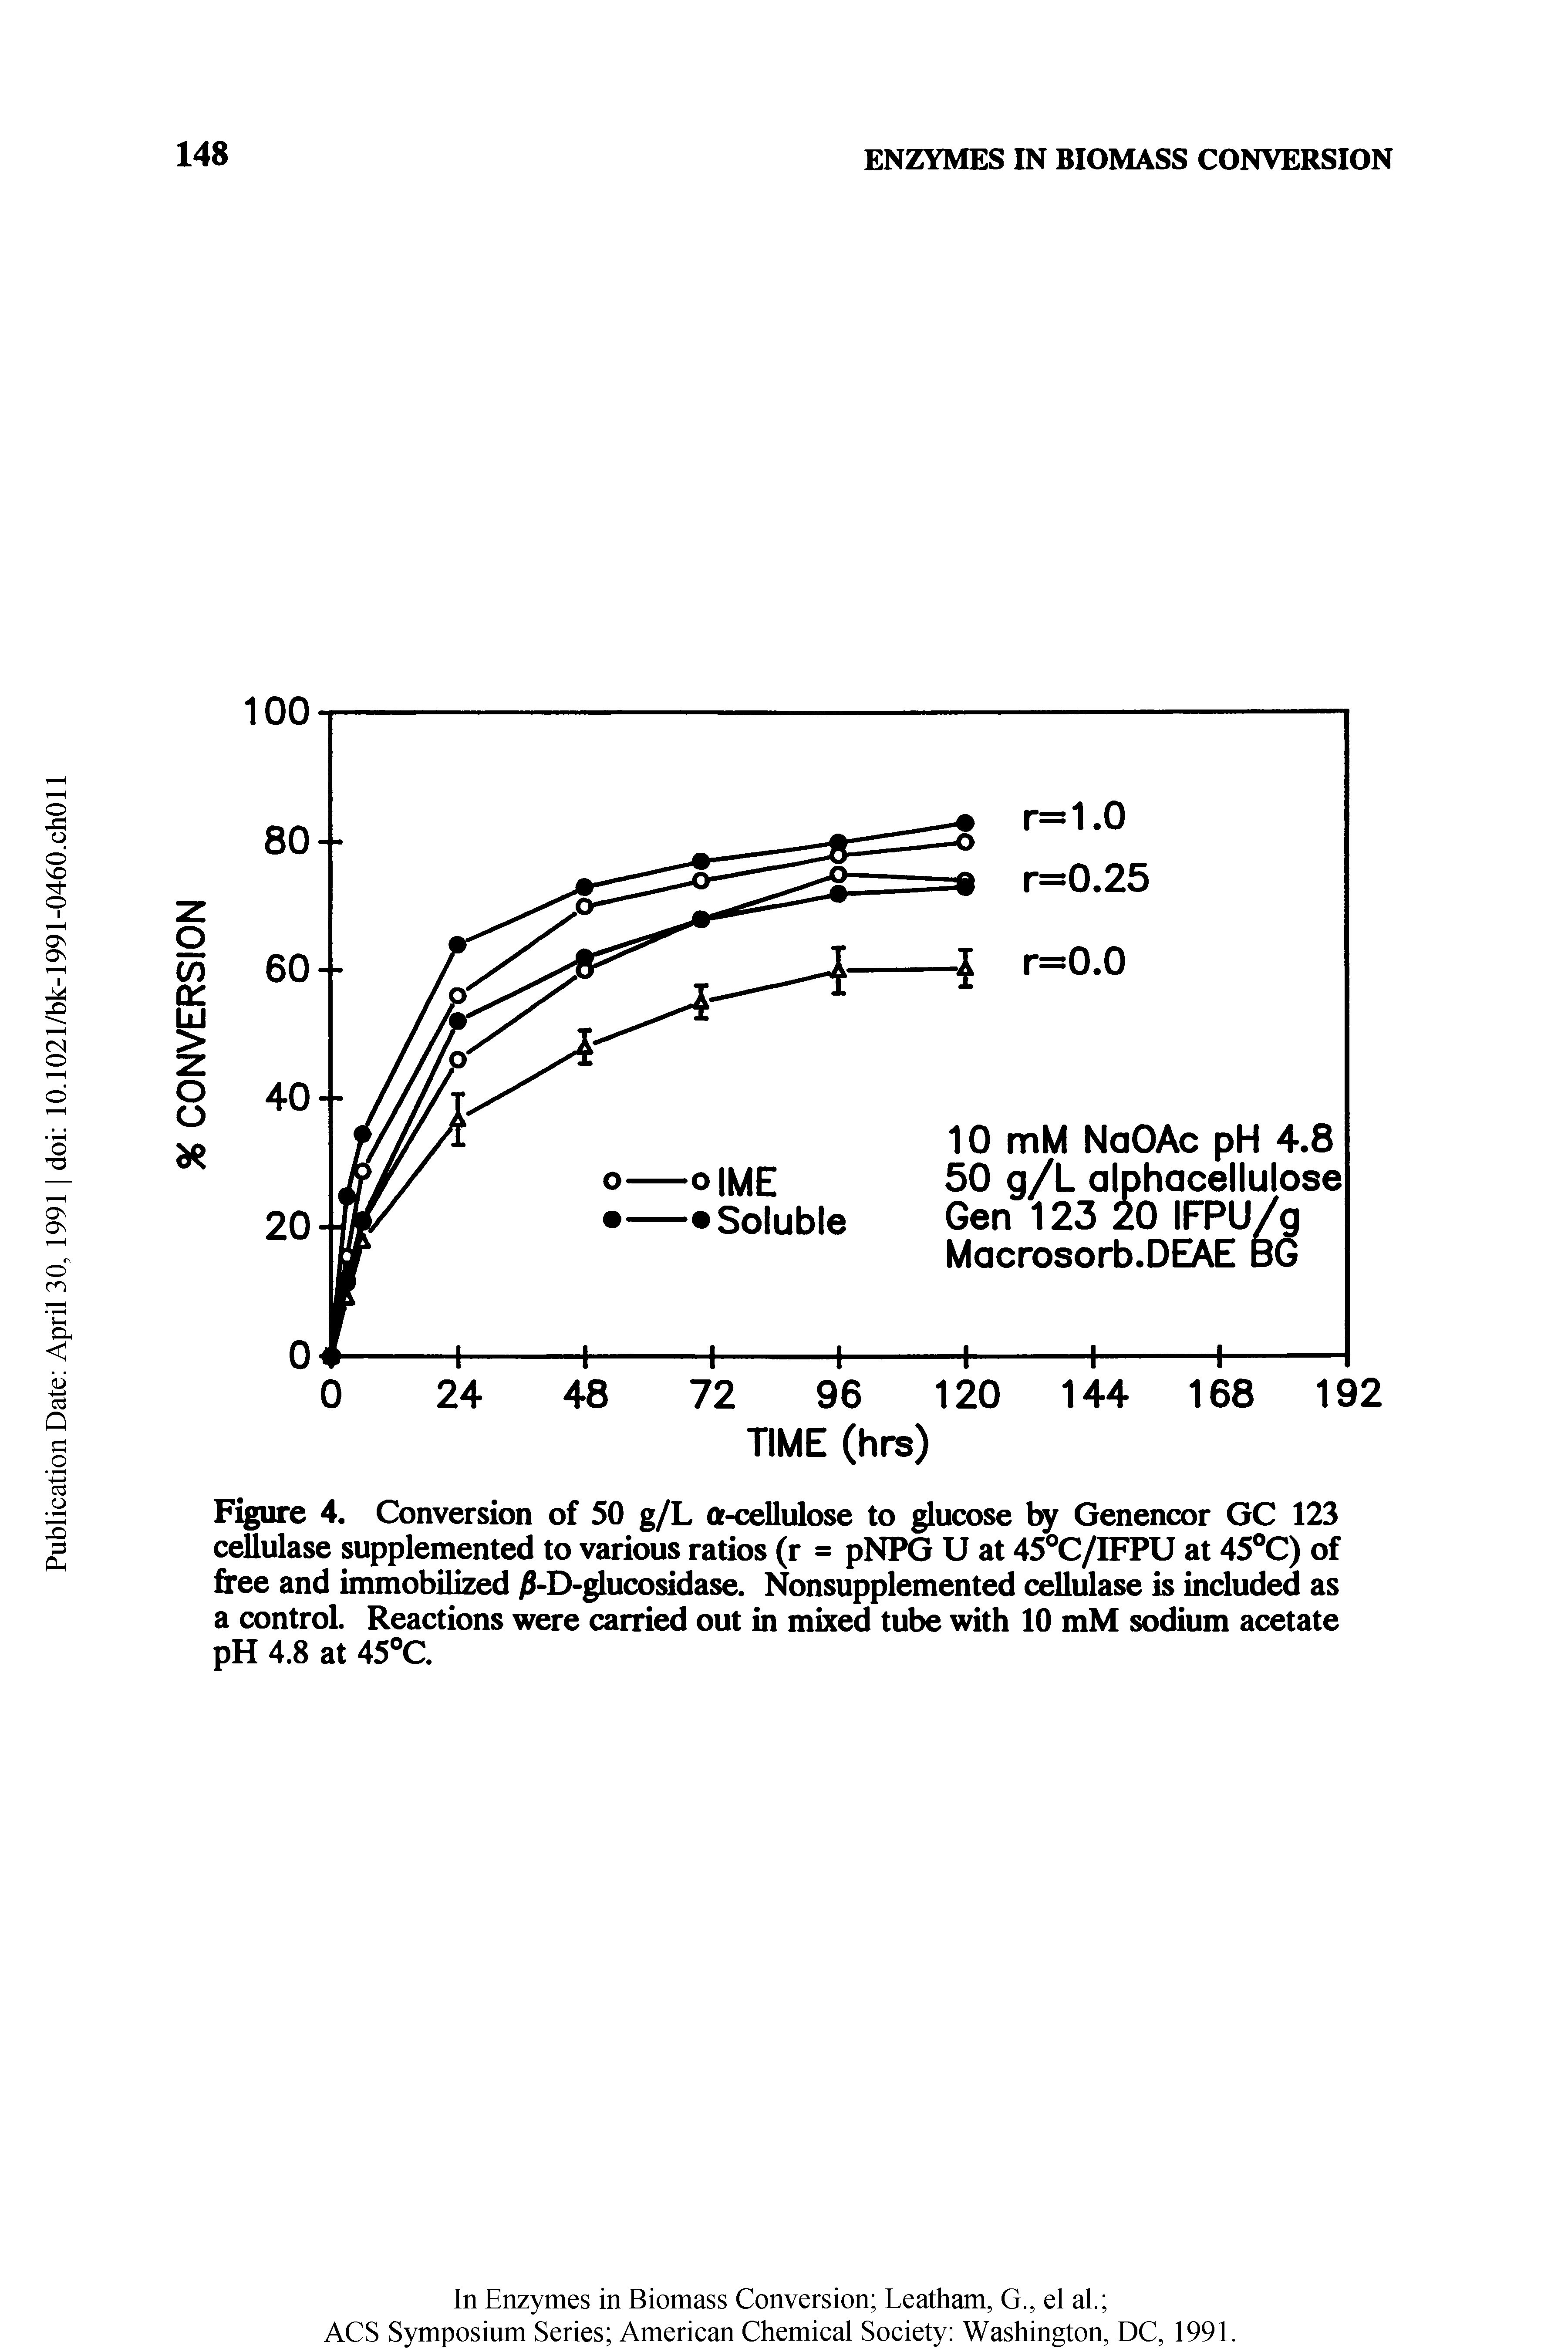 Figure 4. Conversion of 50 g/L a-cellulose to glucose ly Genencor GC 123 cellulase supplemented to various ratios (r = pNPG U at 45°C/IFPU at 45 C) of free and immobilized -D-glucosidase. Nonsupplemented cellulase is included as a control Reactions were carried out in mixed tube with 10 mM sodium acetate pH 4.8 at 45°C.